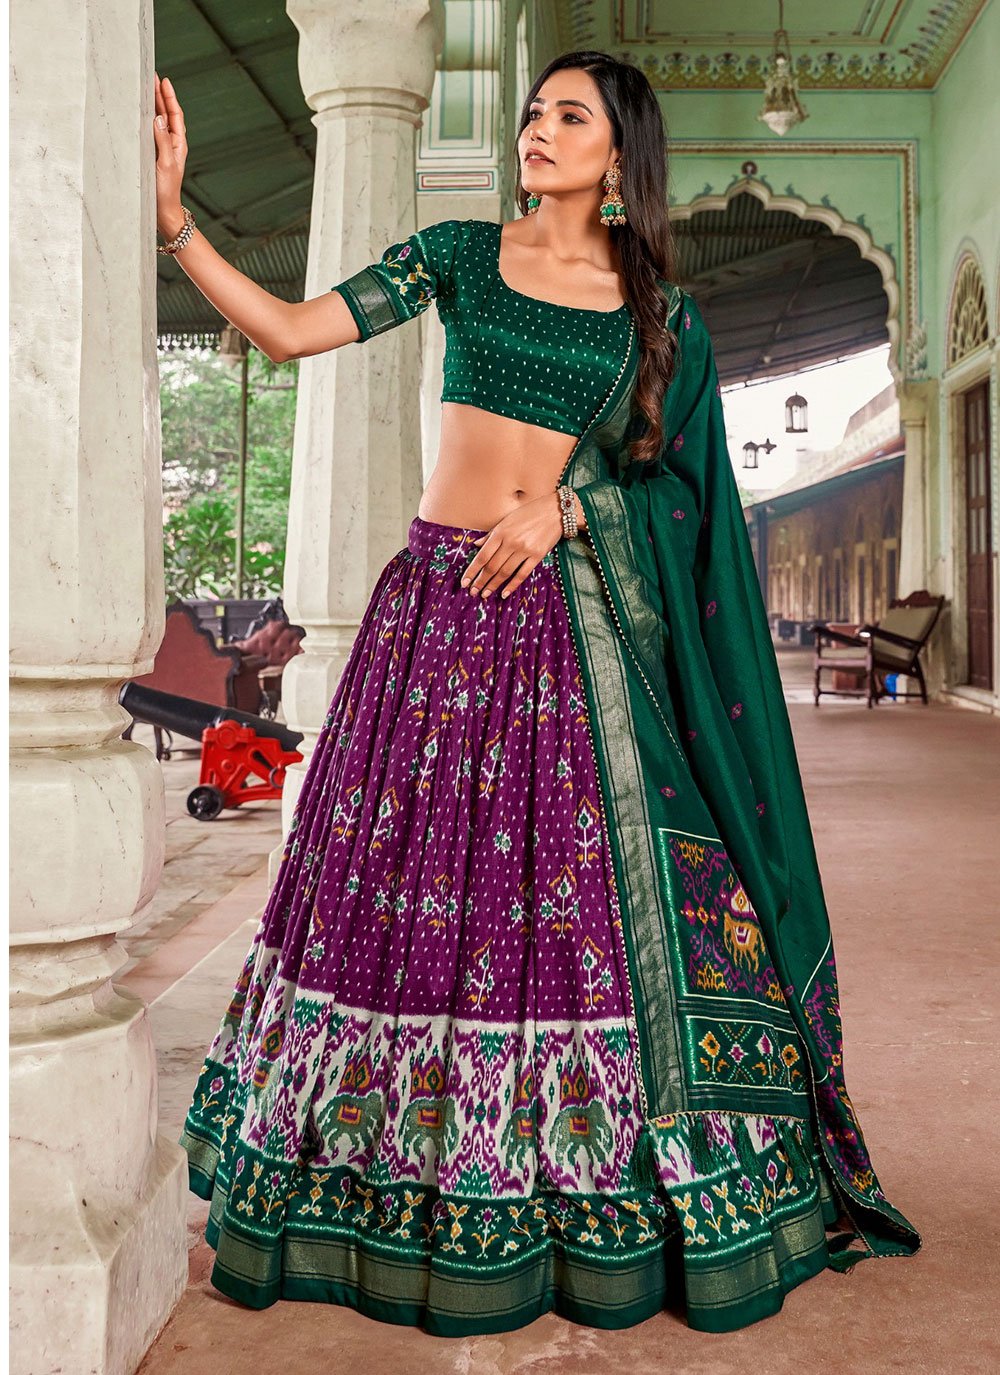 🌷Lehenga choli🌷* Style, design and trend could be at the peak of your  attractiveness as you dress up in this beautiful lehenga choli… | Instagram